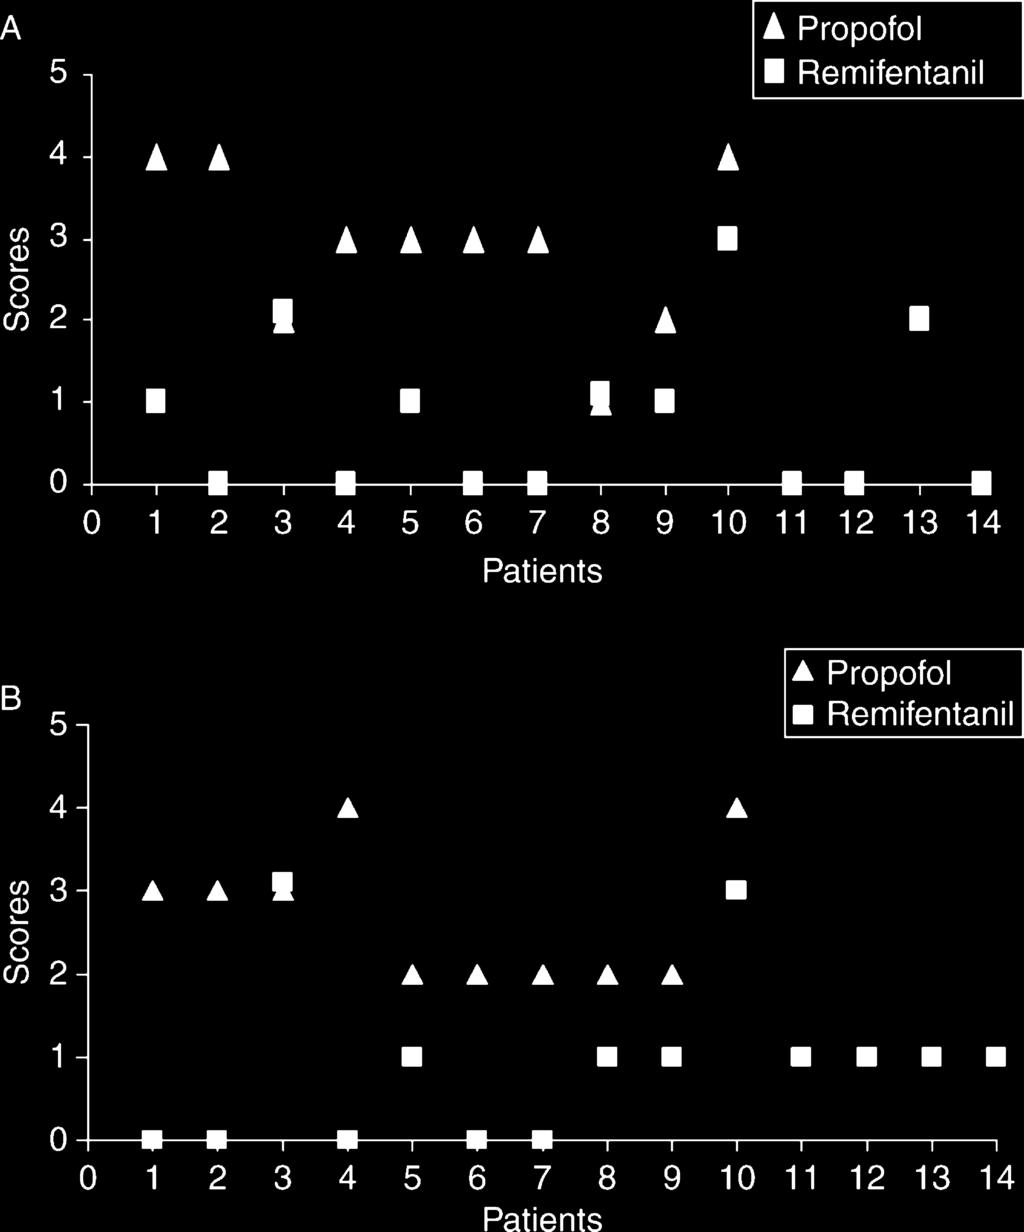 Rai et al. Fig 6 Recall of anaesthetic events in the two groups. Fig 4 Mean drug effect-site concentrations for propofol (mg ml 21 ) and remifentanil (ng ml 21 ). [2(1 2)], Group R [(1 2)] P,0.